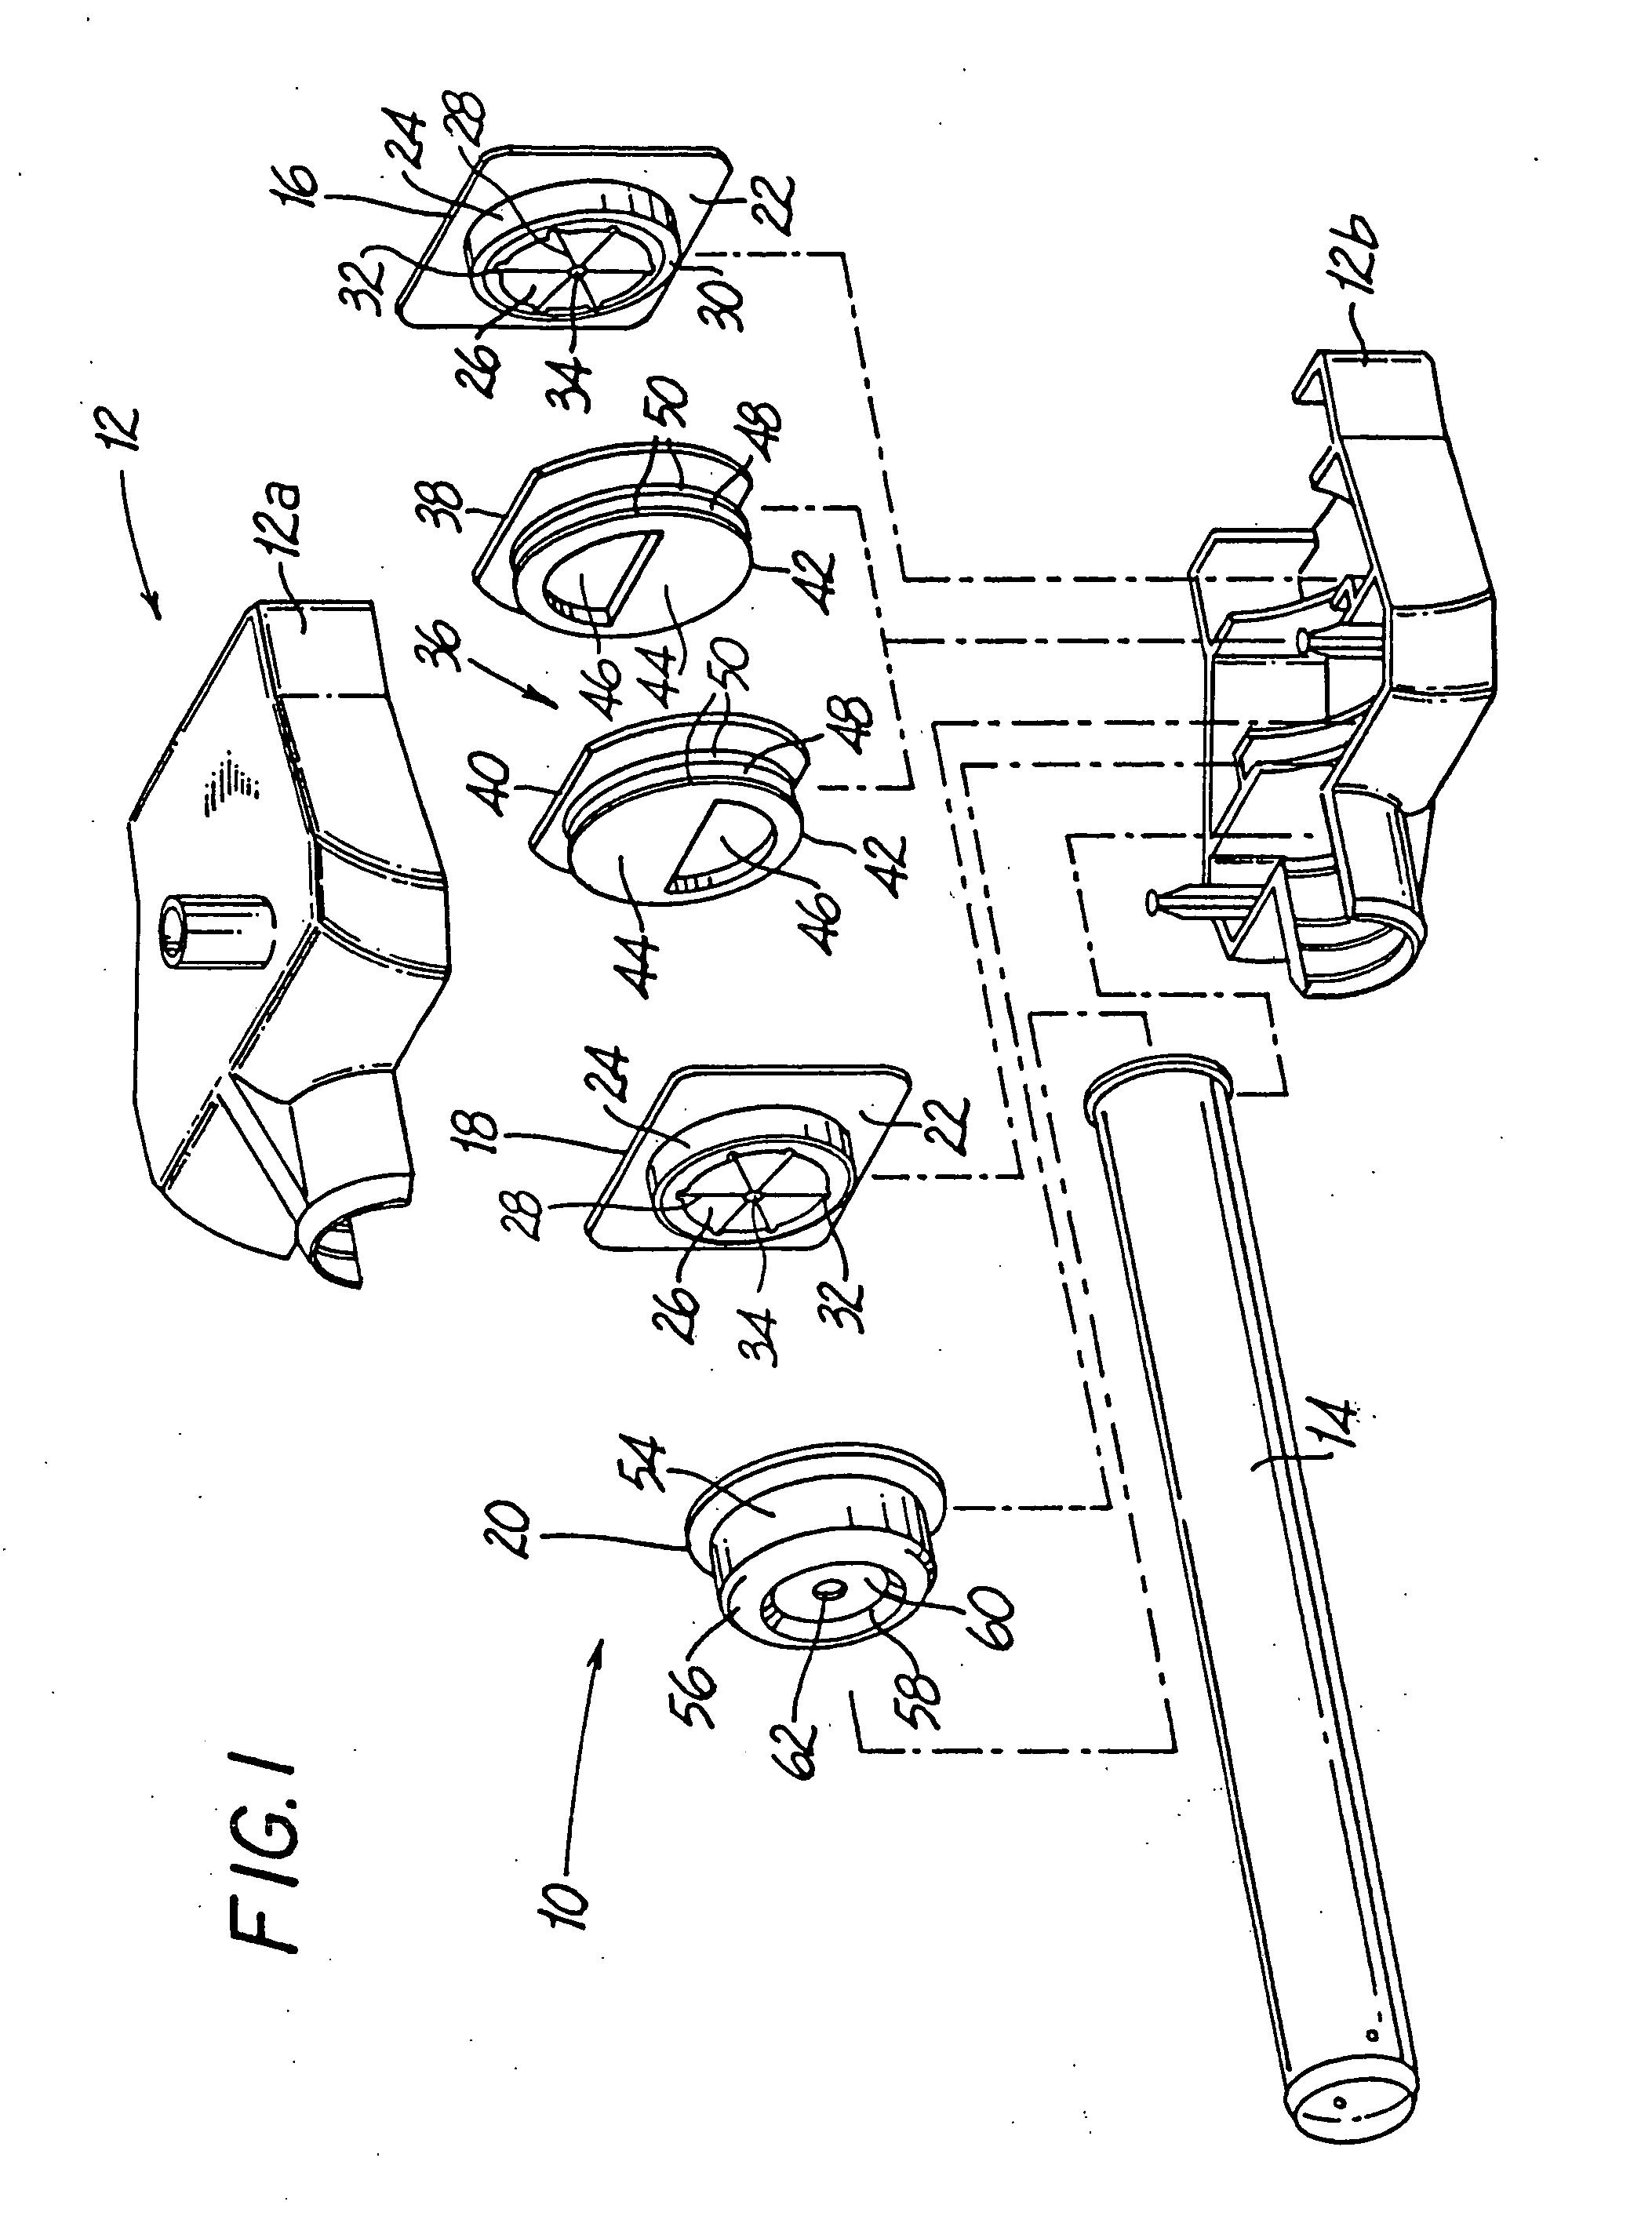 Valve assembly for introducing instruments into body cavities